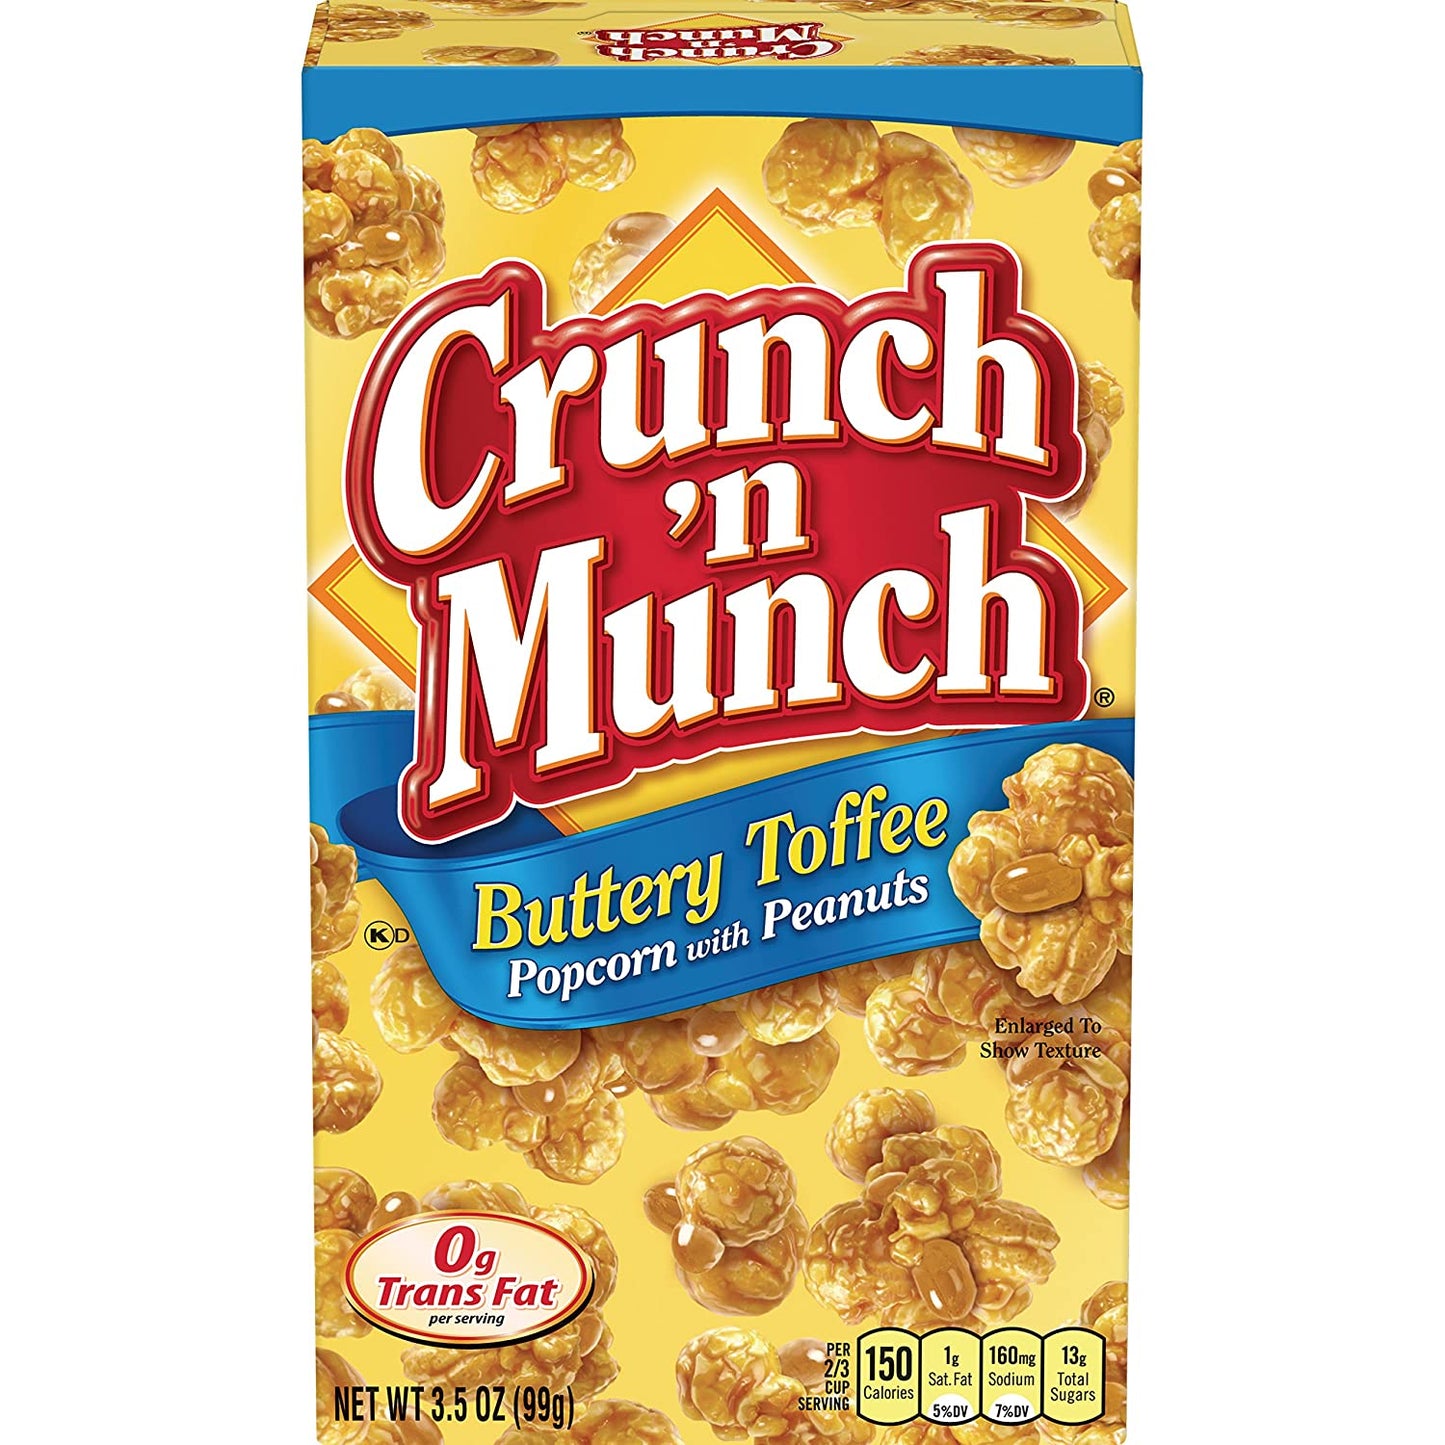 CRUNCH 'N Munch Buttery Toffee Popcorn with Peanuts, 3.5 oz. (Pack of 12)